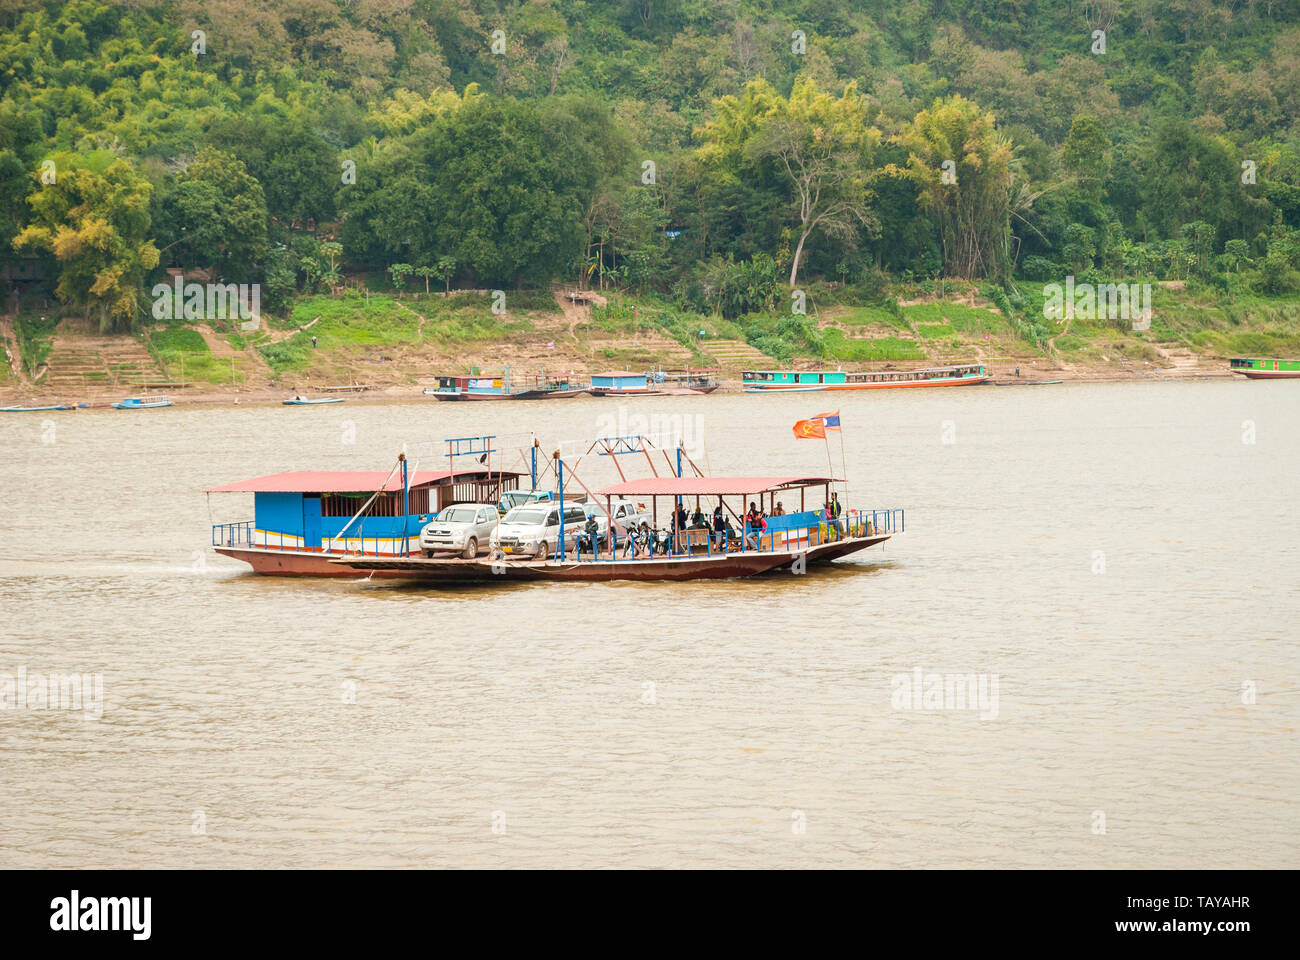 Luang Prabang, Laos - Feb 2016: Local ferry raft transporting cars, motorbikes and people over the Mekong River Stock Photo